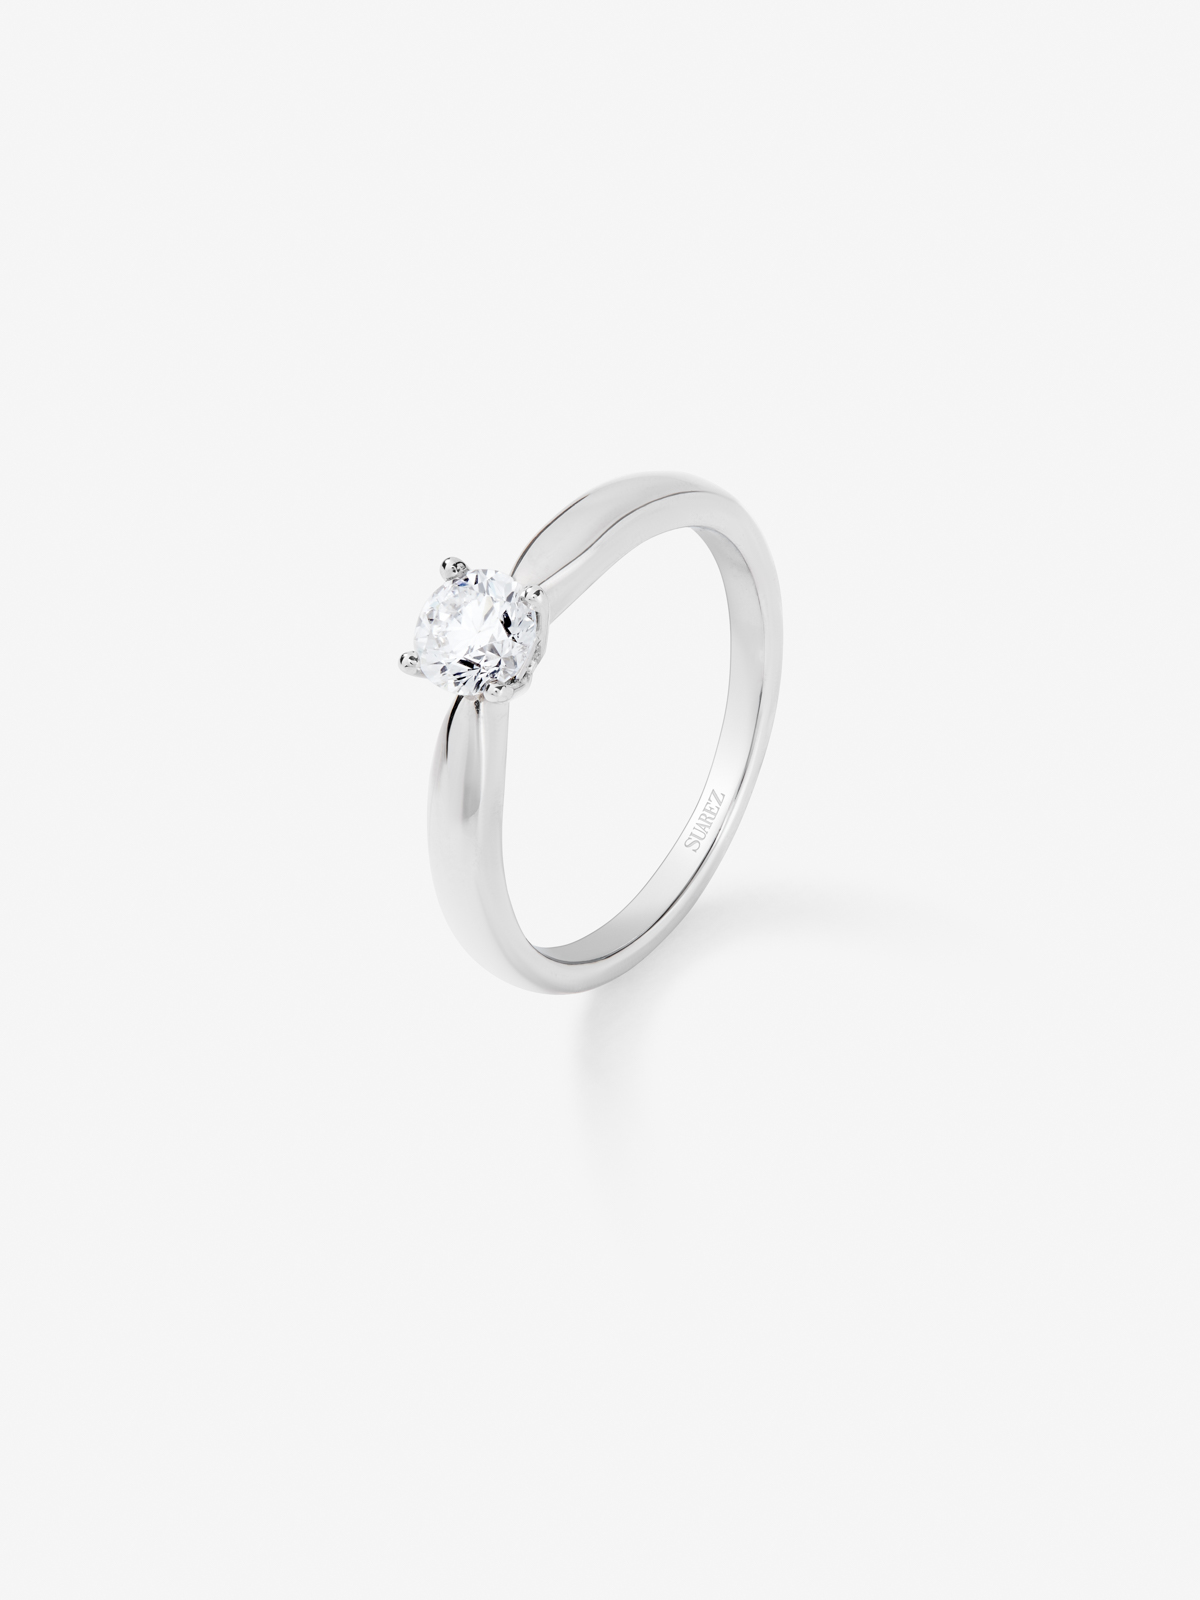 18K white gold solitaire engagement ring with diamond.